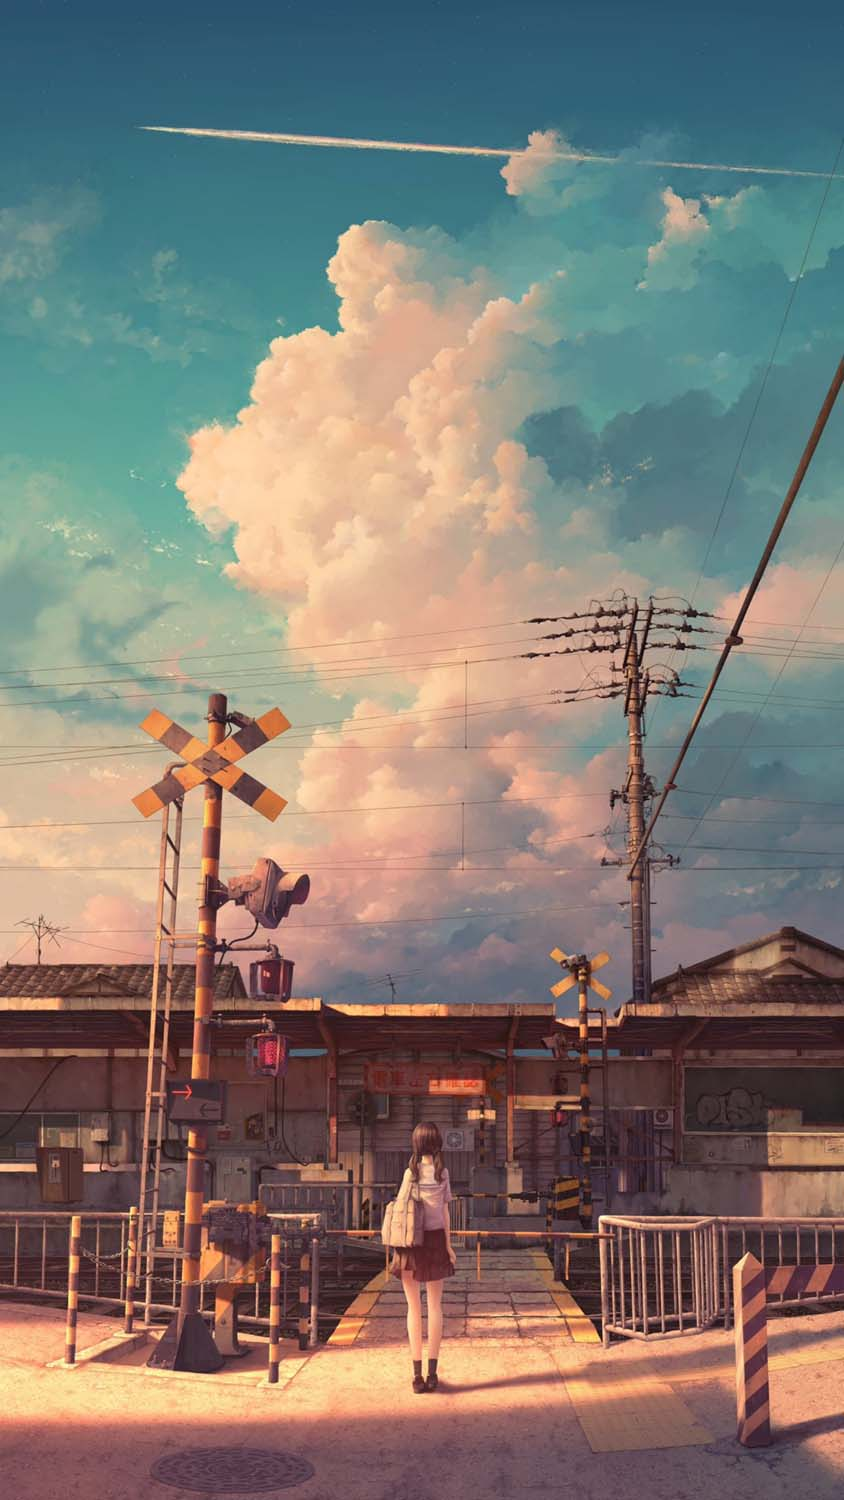 Cloudy Sky Anime IPhone Wallpaper HD  IPhone Wallpapers